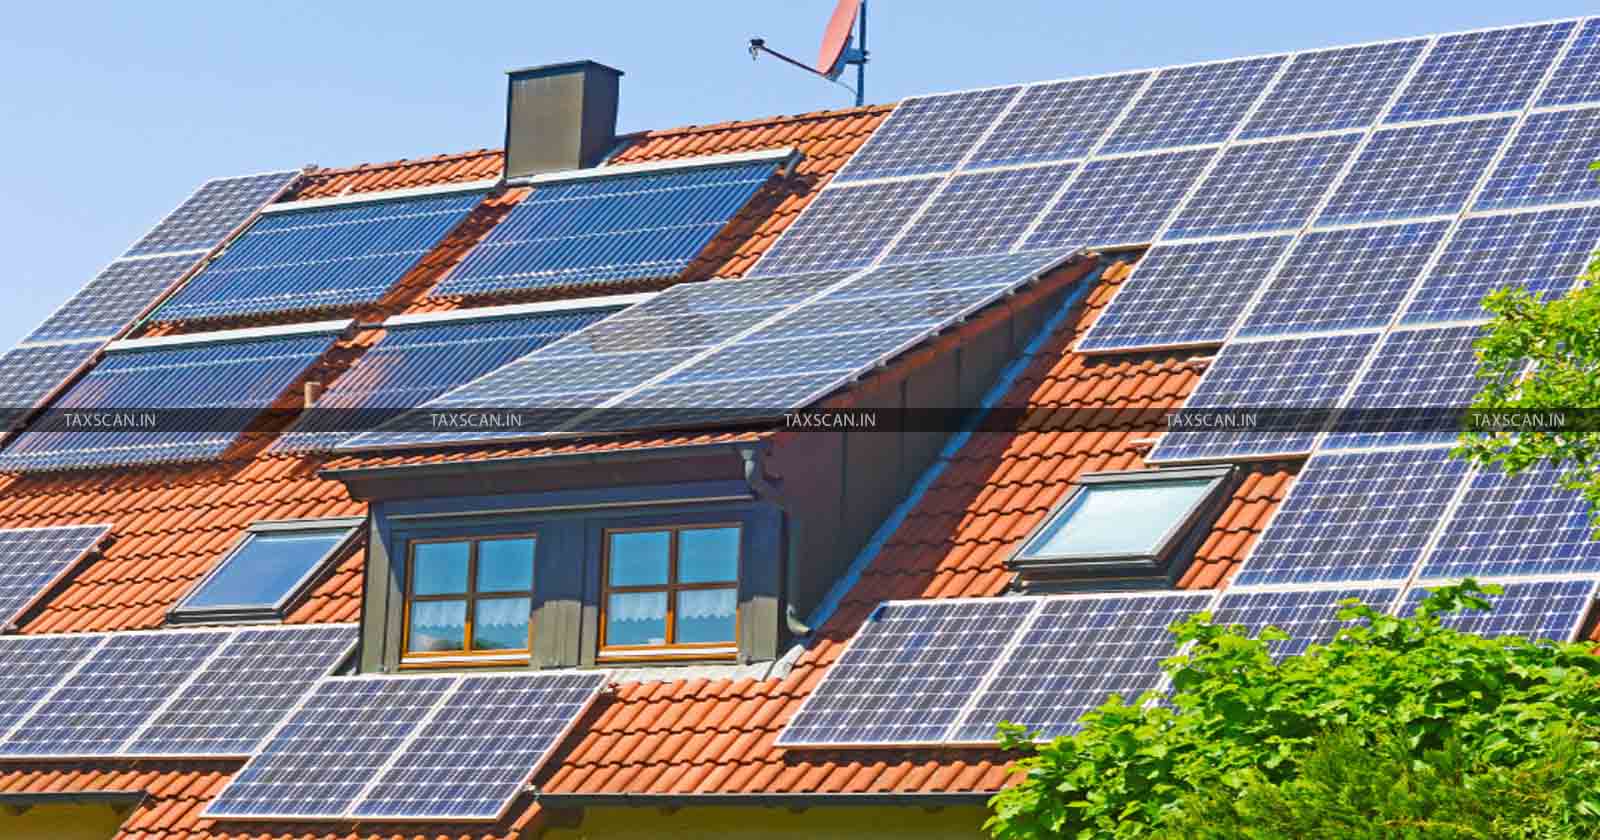 Roof Solar Plant - Solar Plant - Roof Solar - Solar Plant Classifiable under Plant and Machinery - Classifiable under Plant and Machinery - TAXSCAN